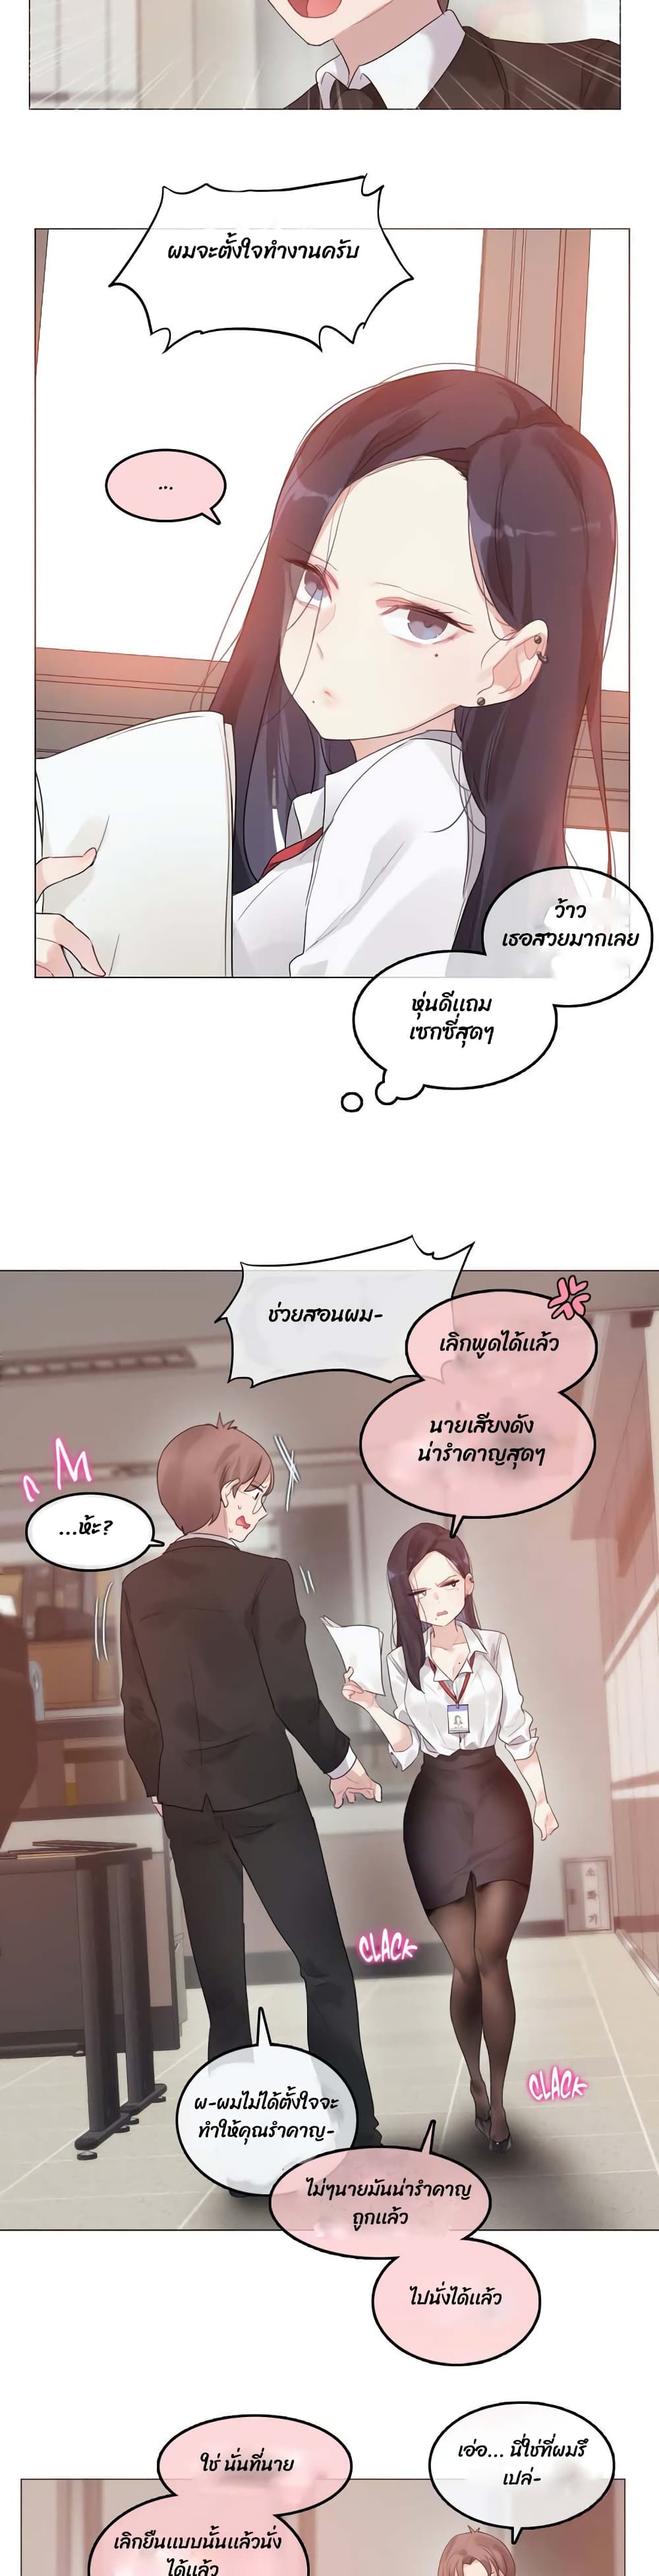 A Pervert's Daily Life 92 (8)